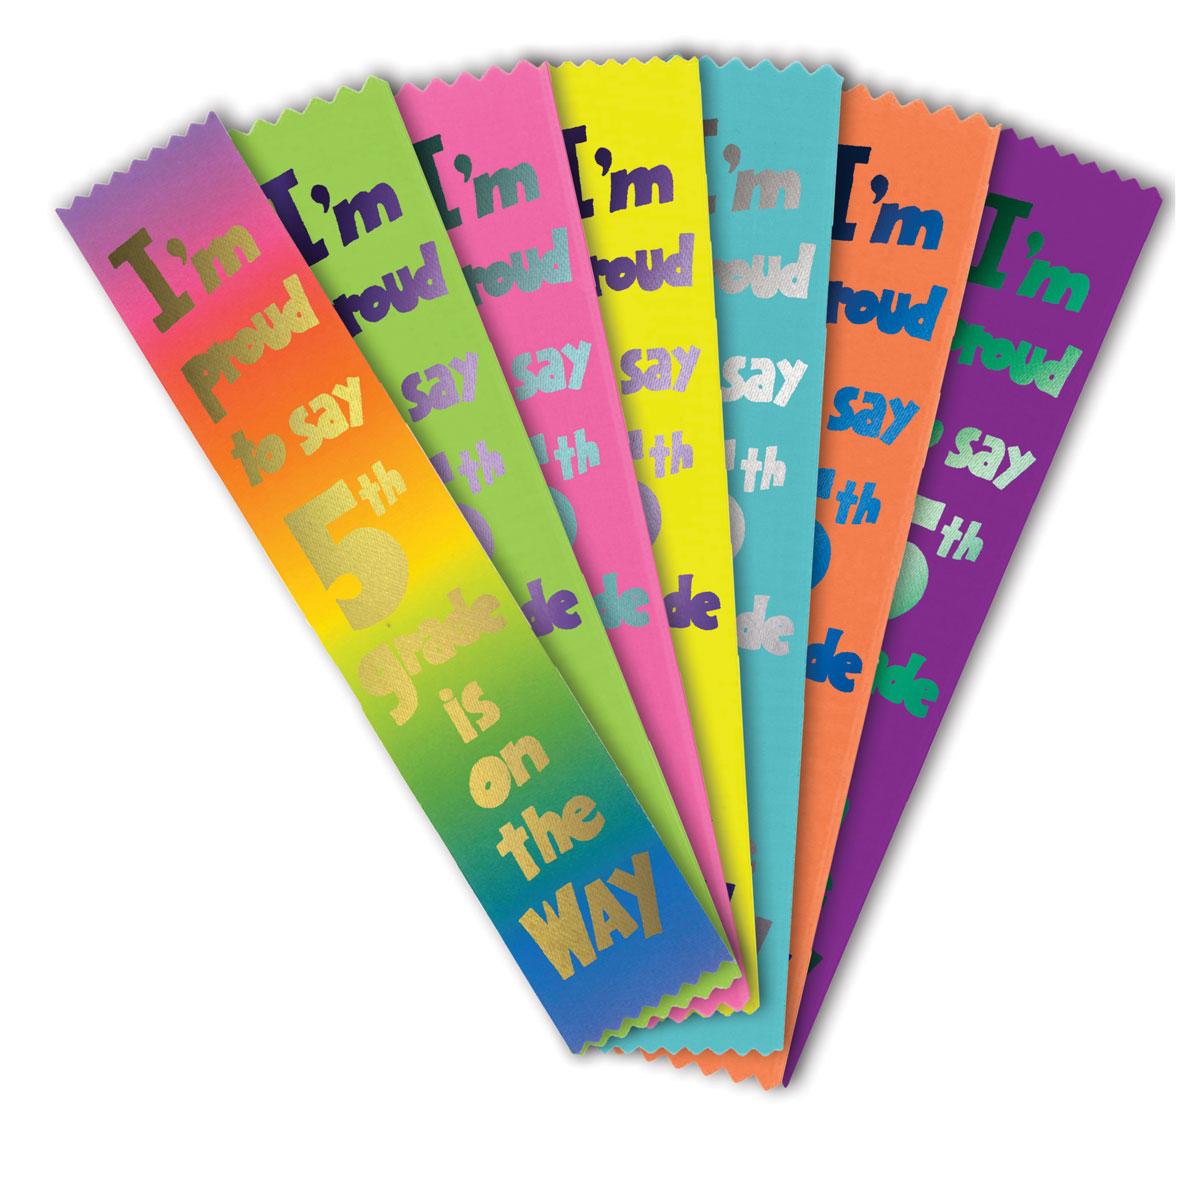 colorful satin ribbons with foil-stamped 5th grade design